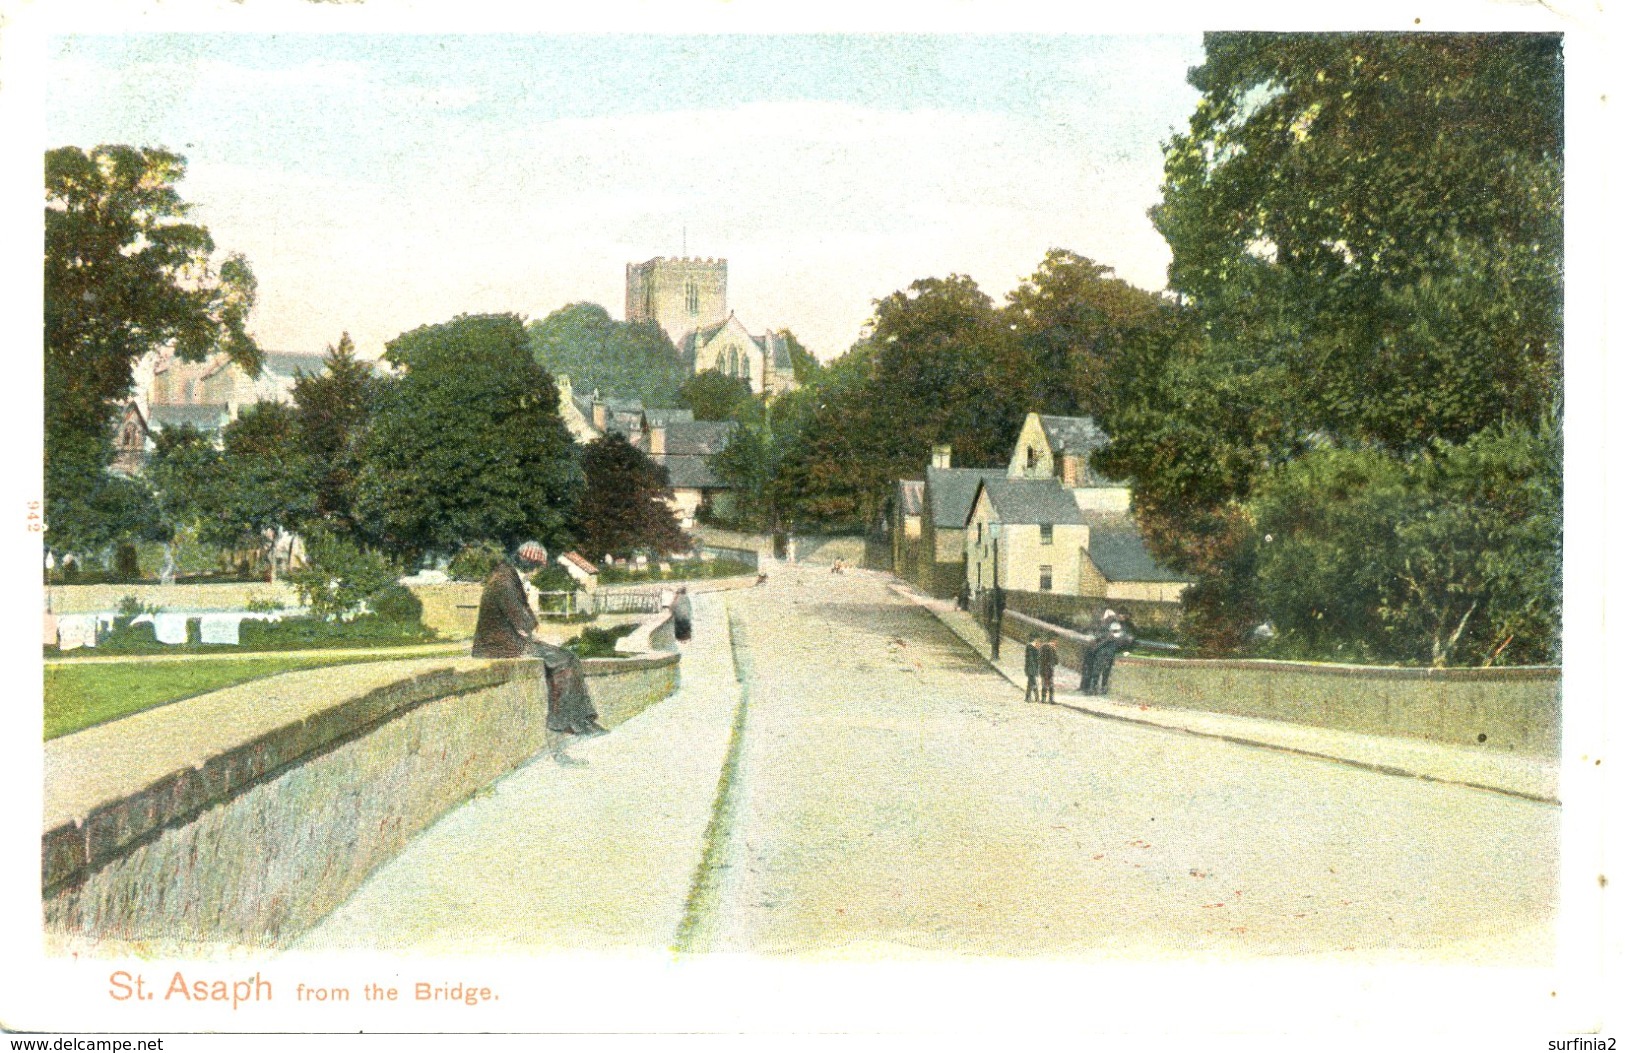 CLWYD - ST ASAPH FROM THE BRIDGE - EARLY Clw368 - Flintshire